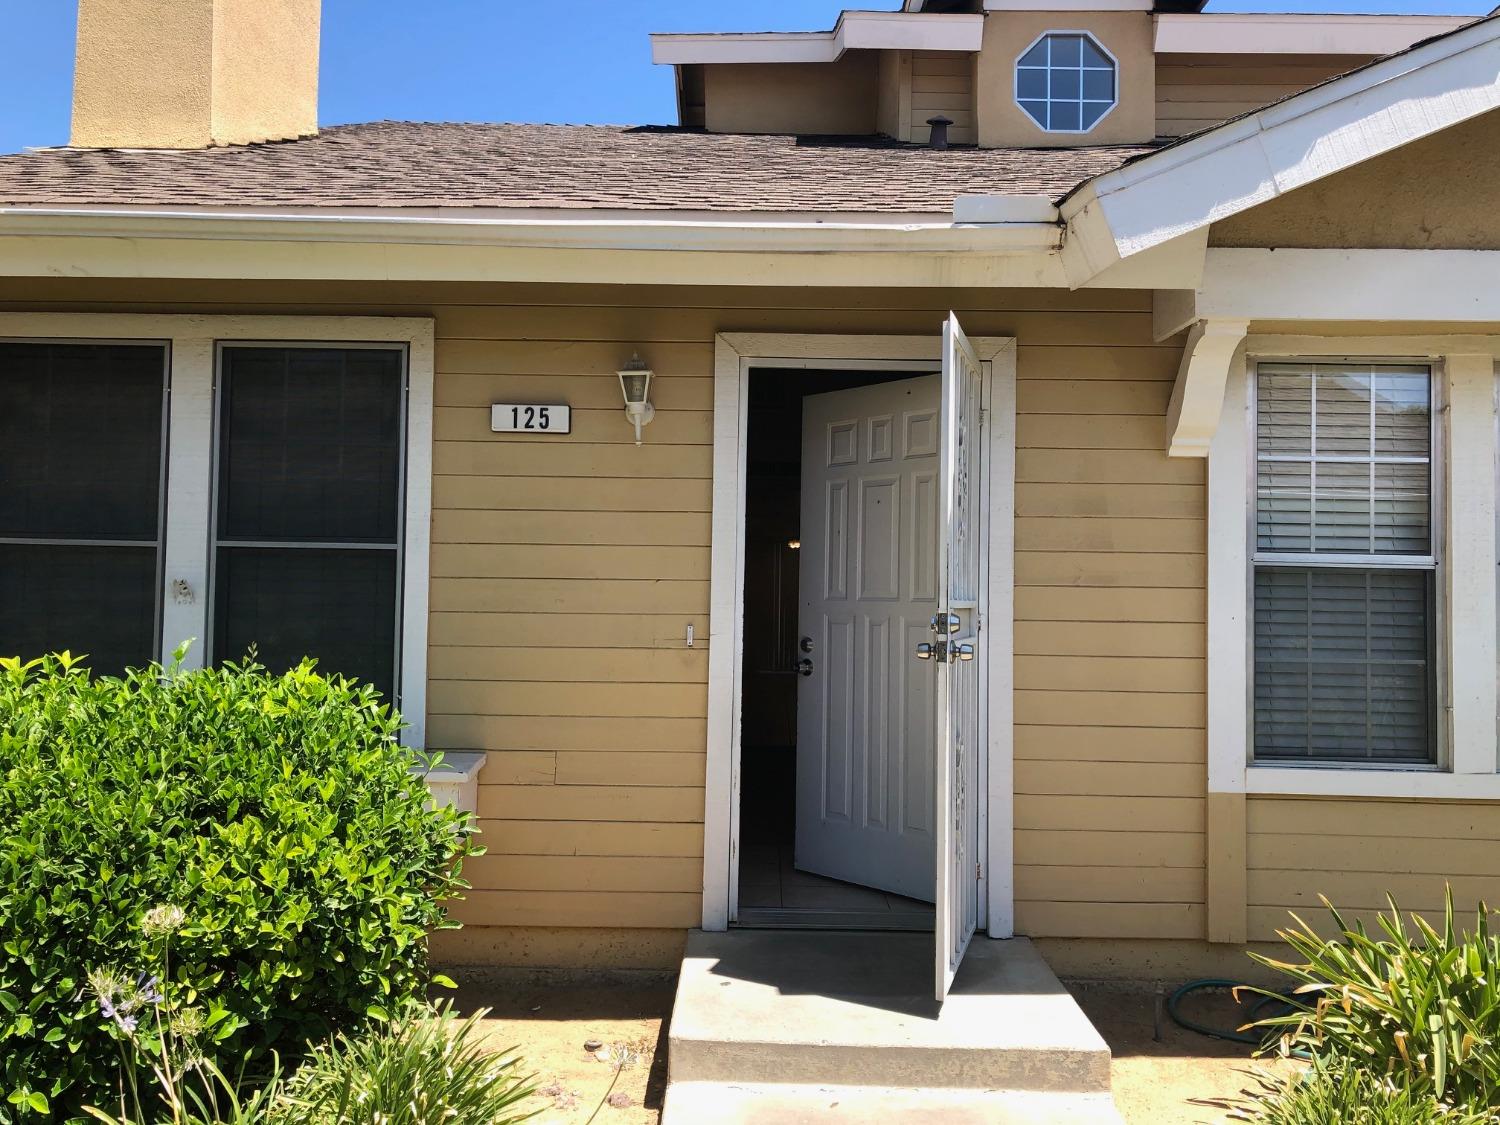 Photo of 5455 N Marty Ave in Fresno, CA